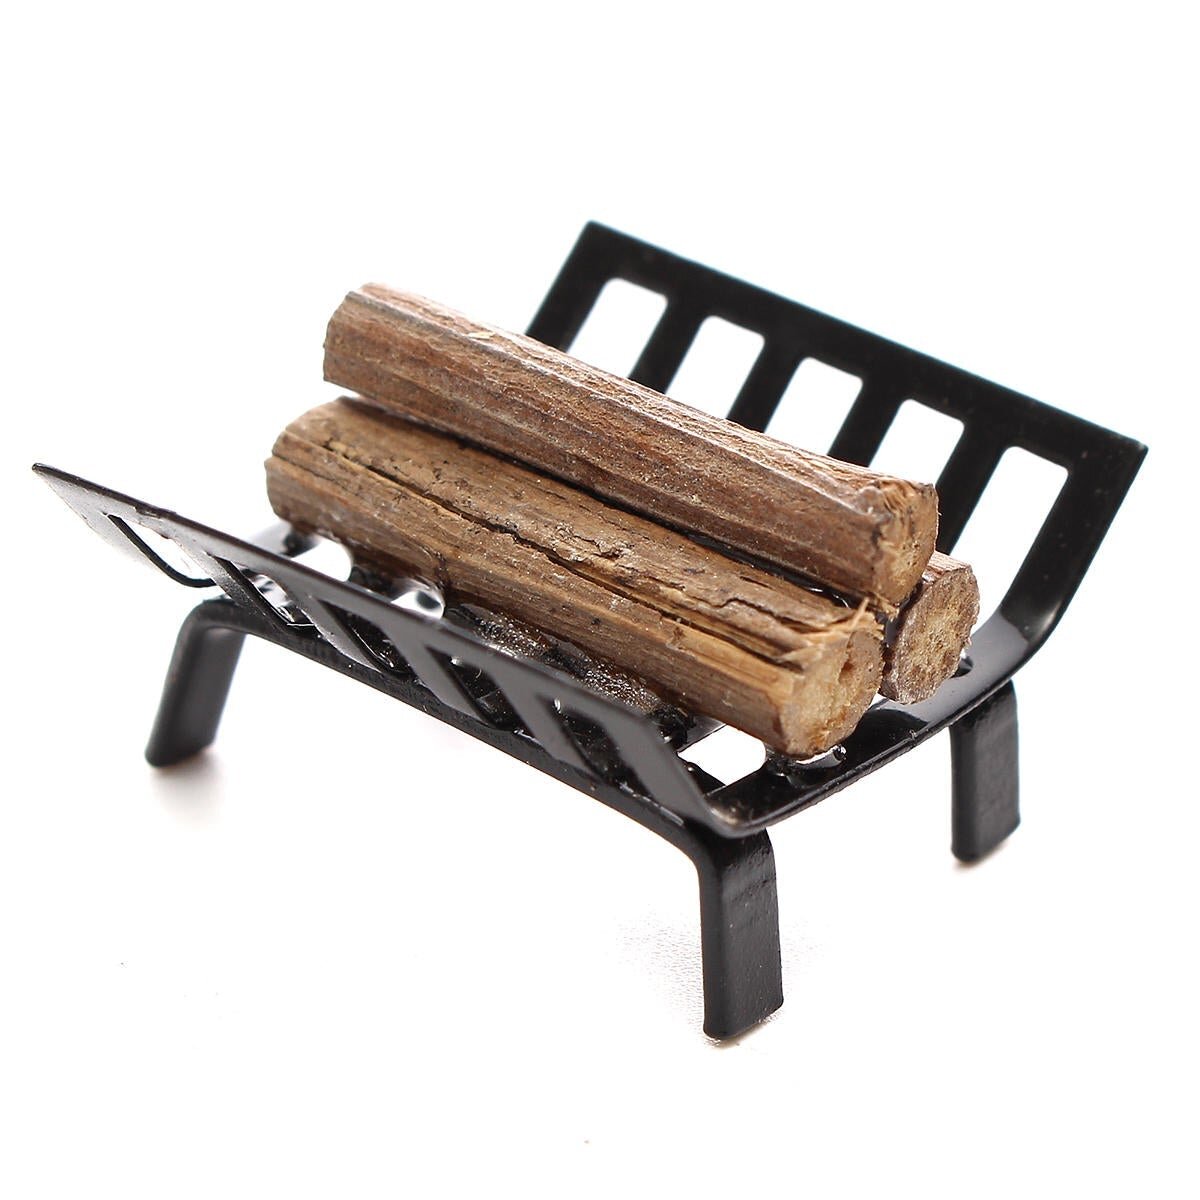 Firewood Miniature Kitchen Furniture Accessories For Home Decor